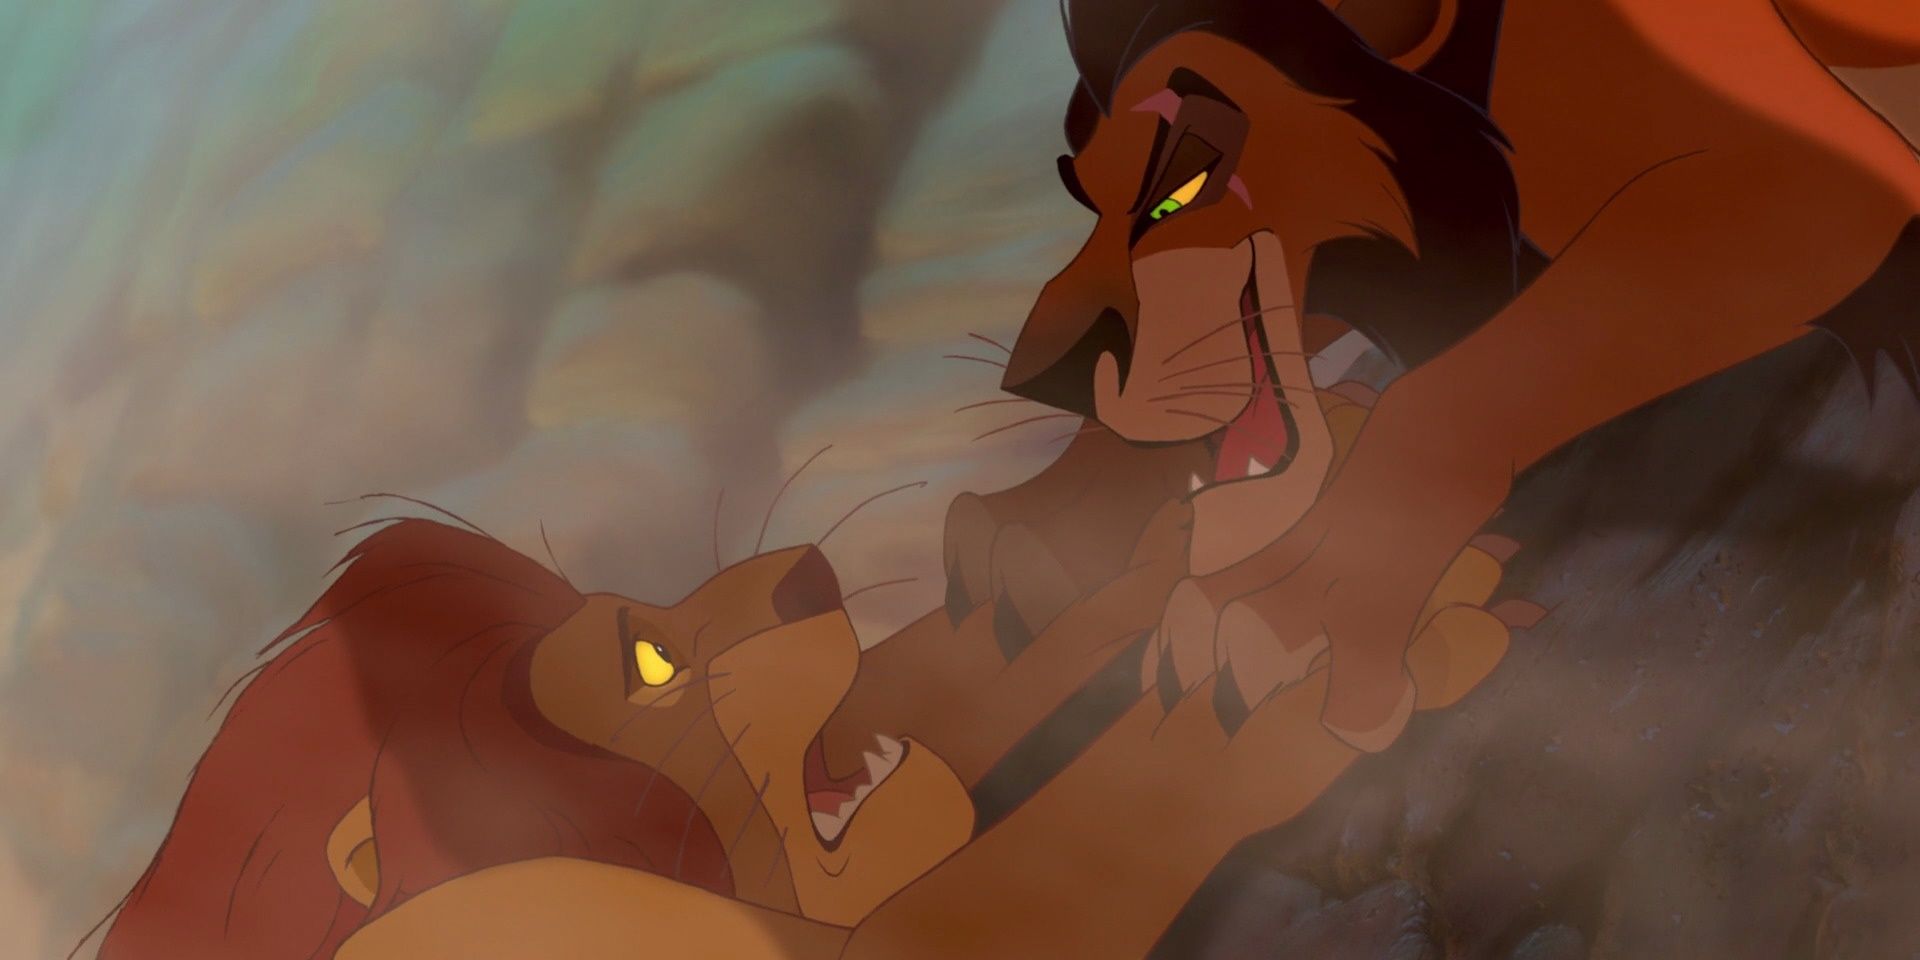 TikTok Theory Suggests Scar Ate Mufasa's Body In The King